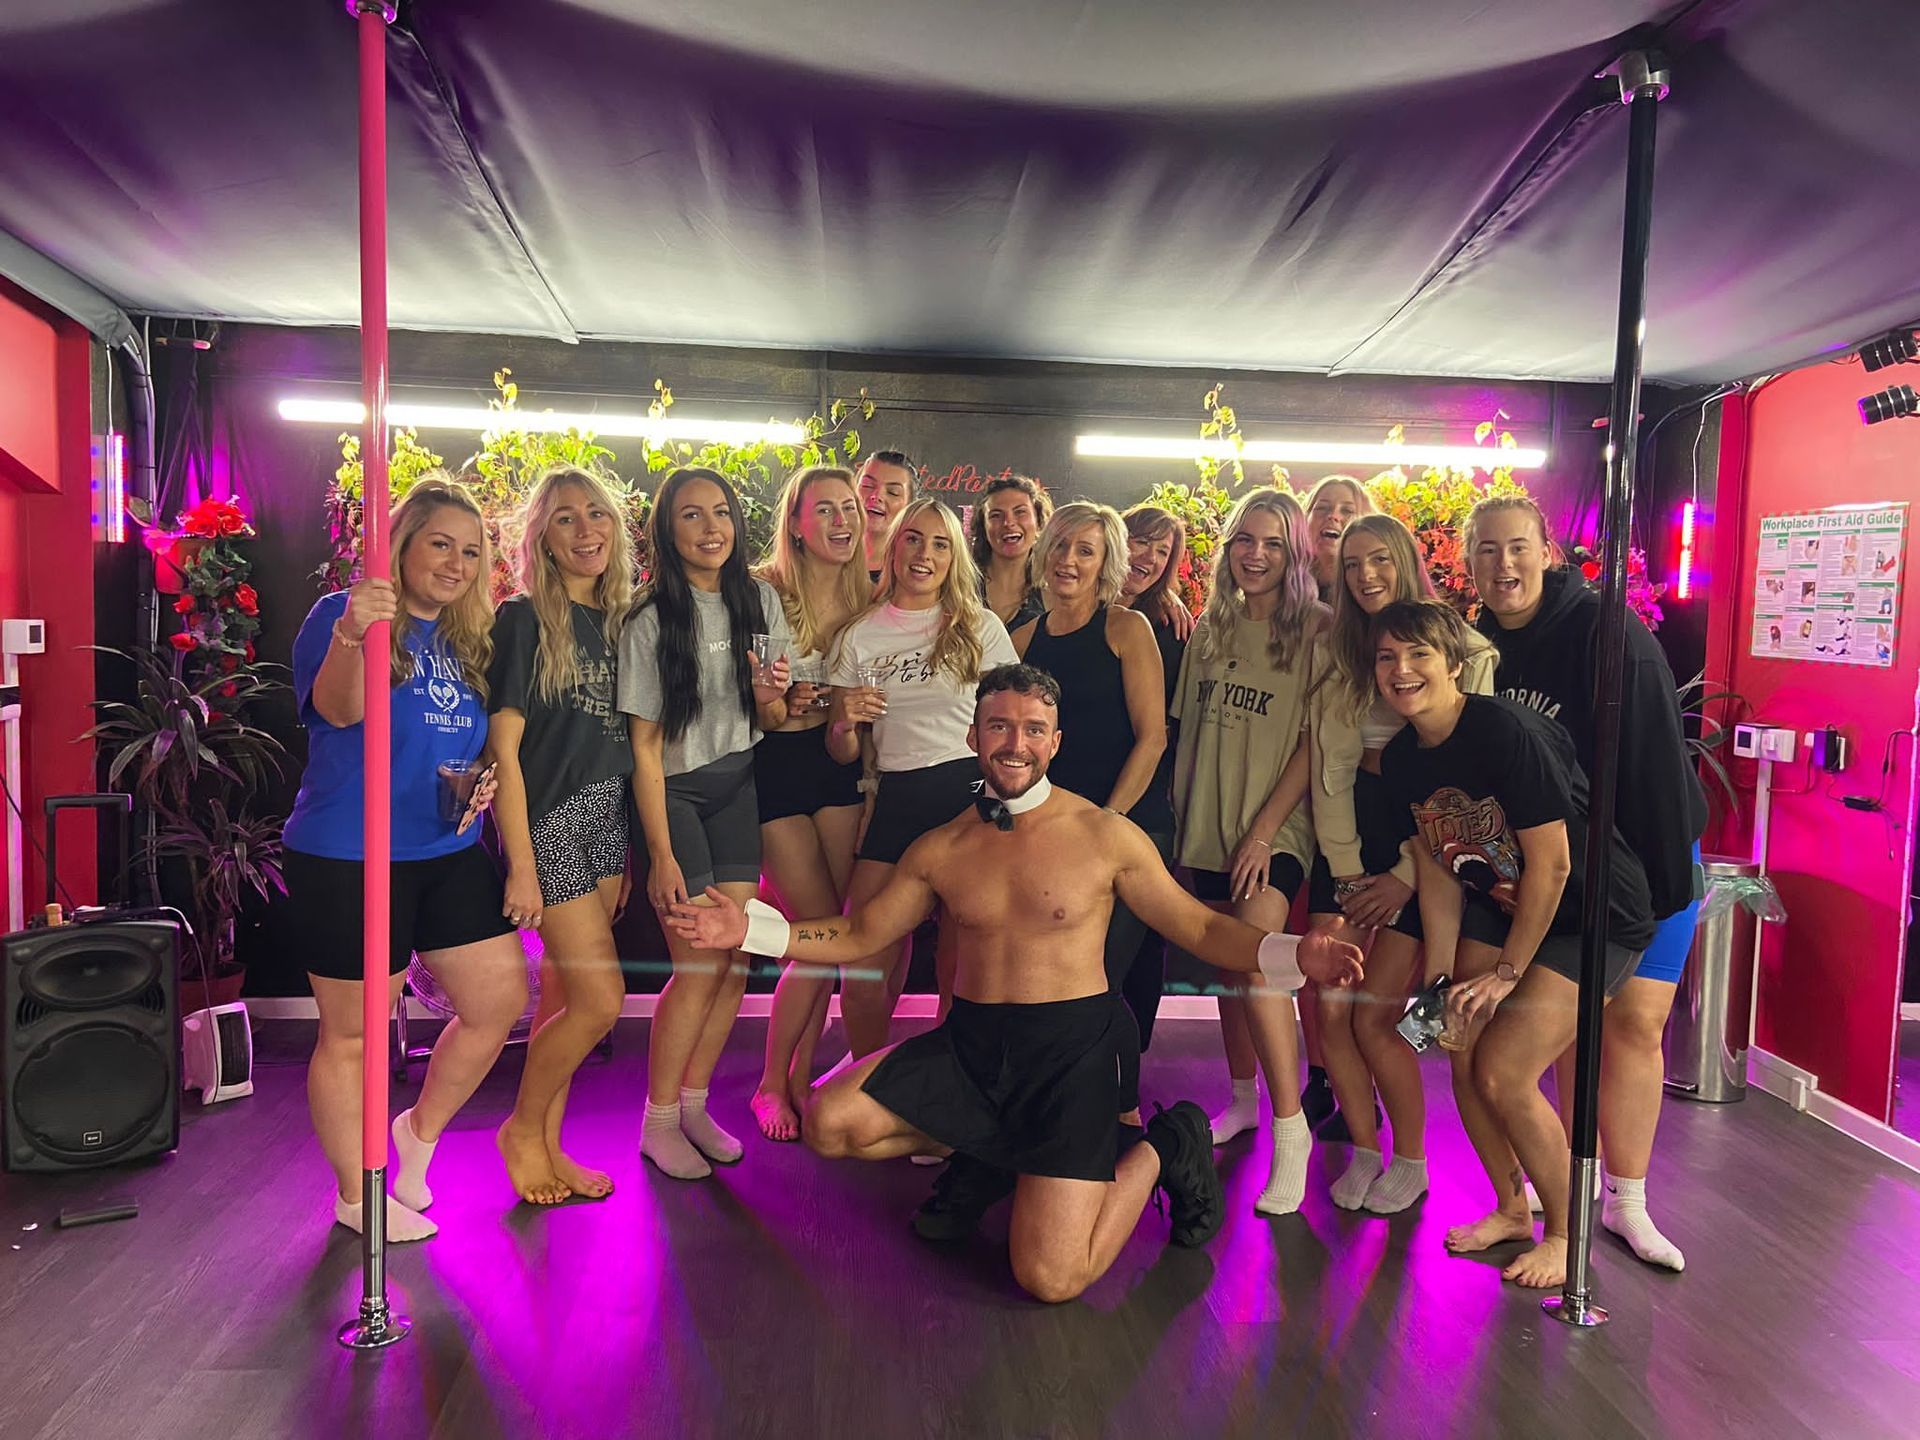 Party, Pose, Perform: Elevate Your Event with Pole Dancing Fun! Choose Your After-Party Thrill: A Mesmerizing Male Stripper or Charming Buff Butler Experience. The Choice is Yours!